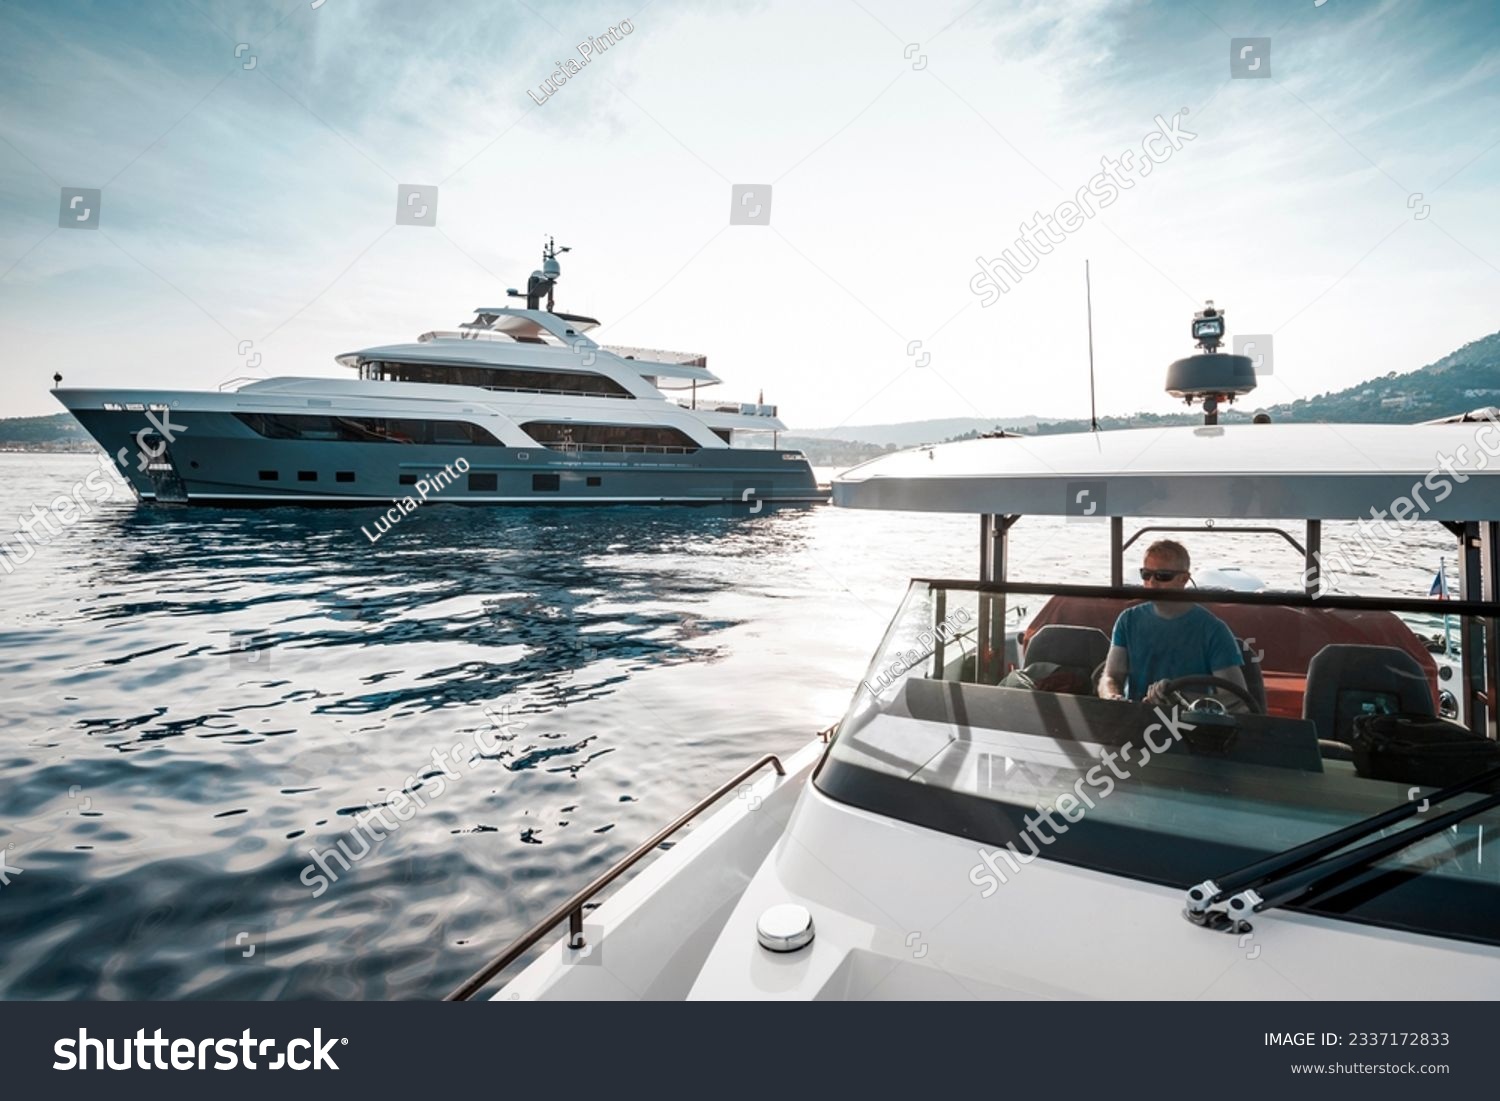 Superyacht deckhand crew on duty, driving chase boat tender next to a 38 meter modern superyacht at anchor in the Bay of Saint-Jean-Cap-Ferrat, south of France #2337172833